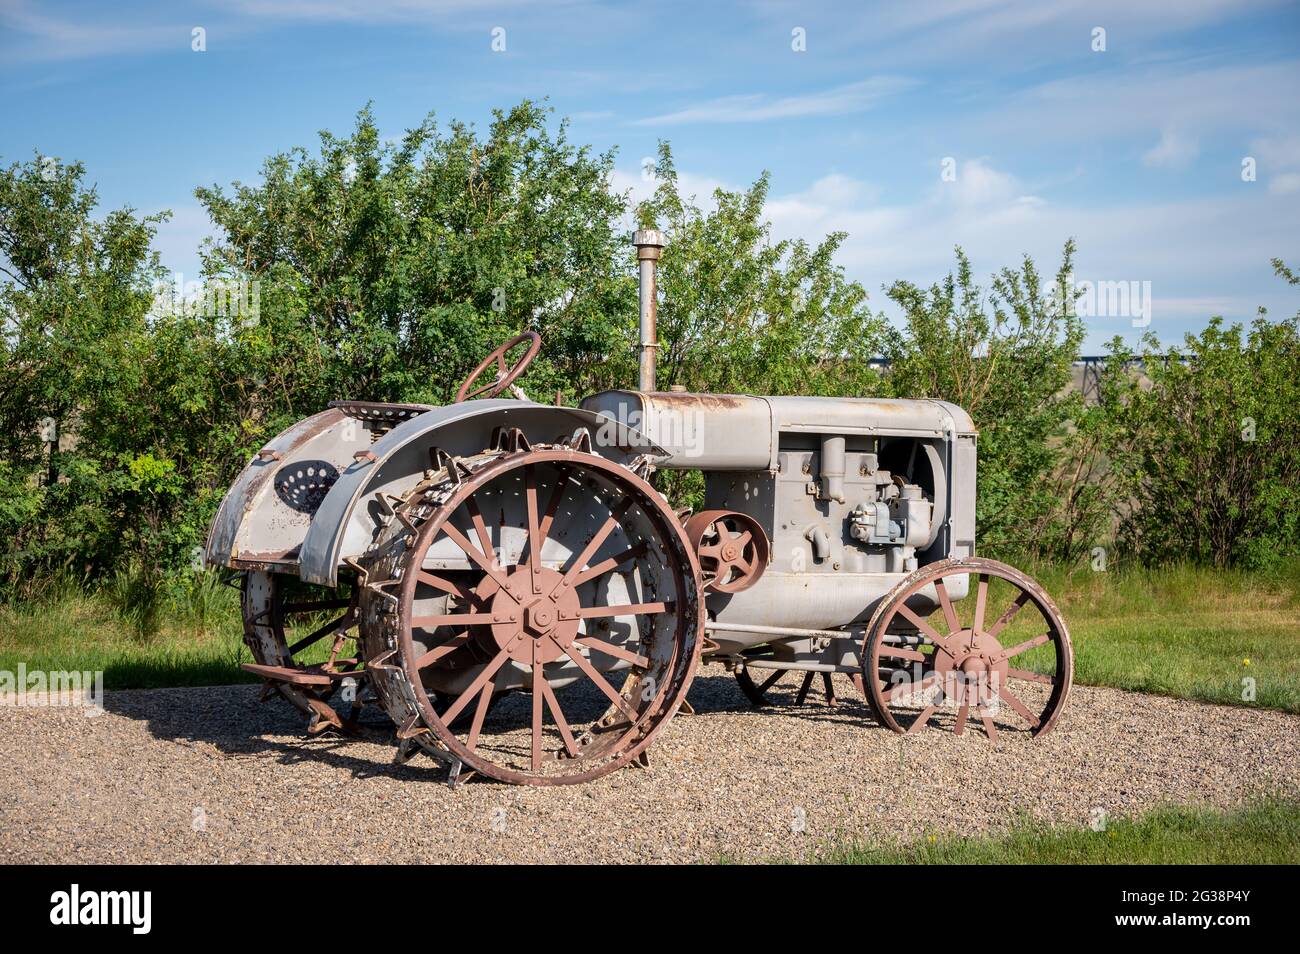 Lethbridge, Alberta - June 13, 2021: A historic tractor on the grounds of the Galt Museum in Lethbridge. Stock Photo